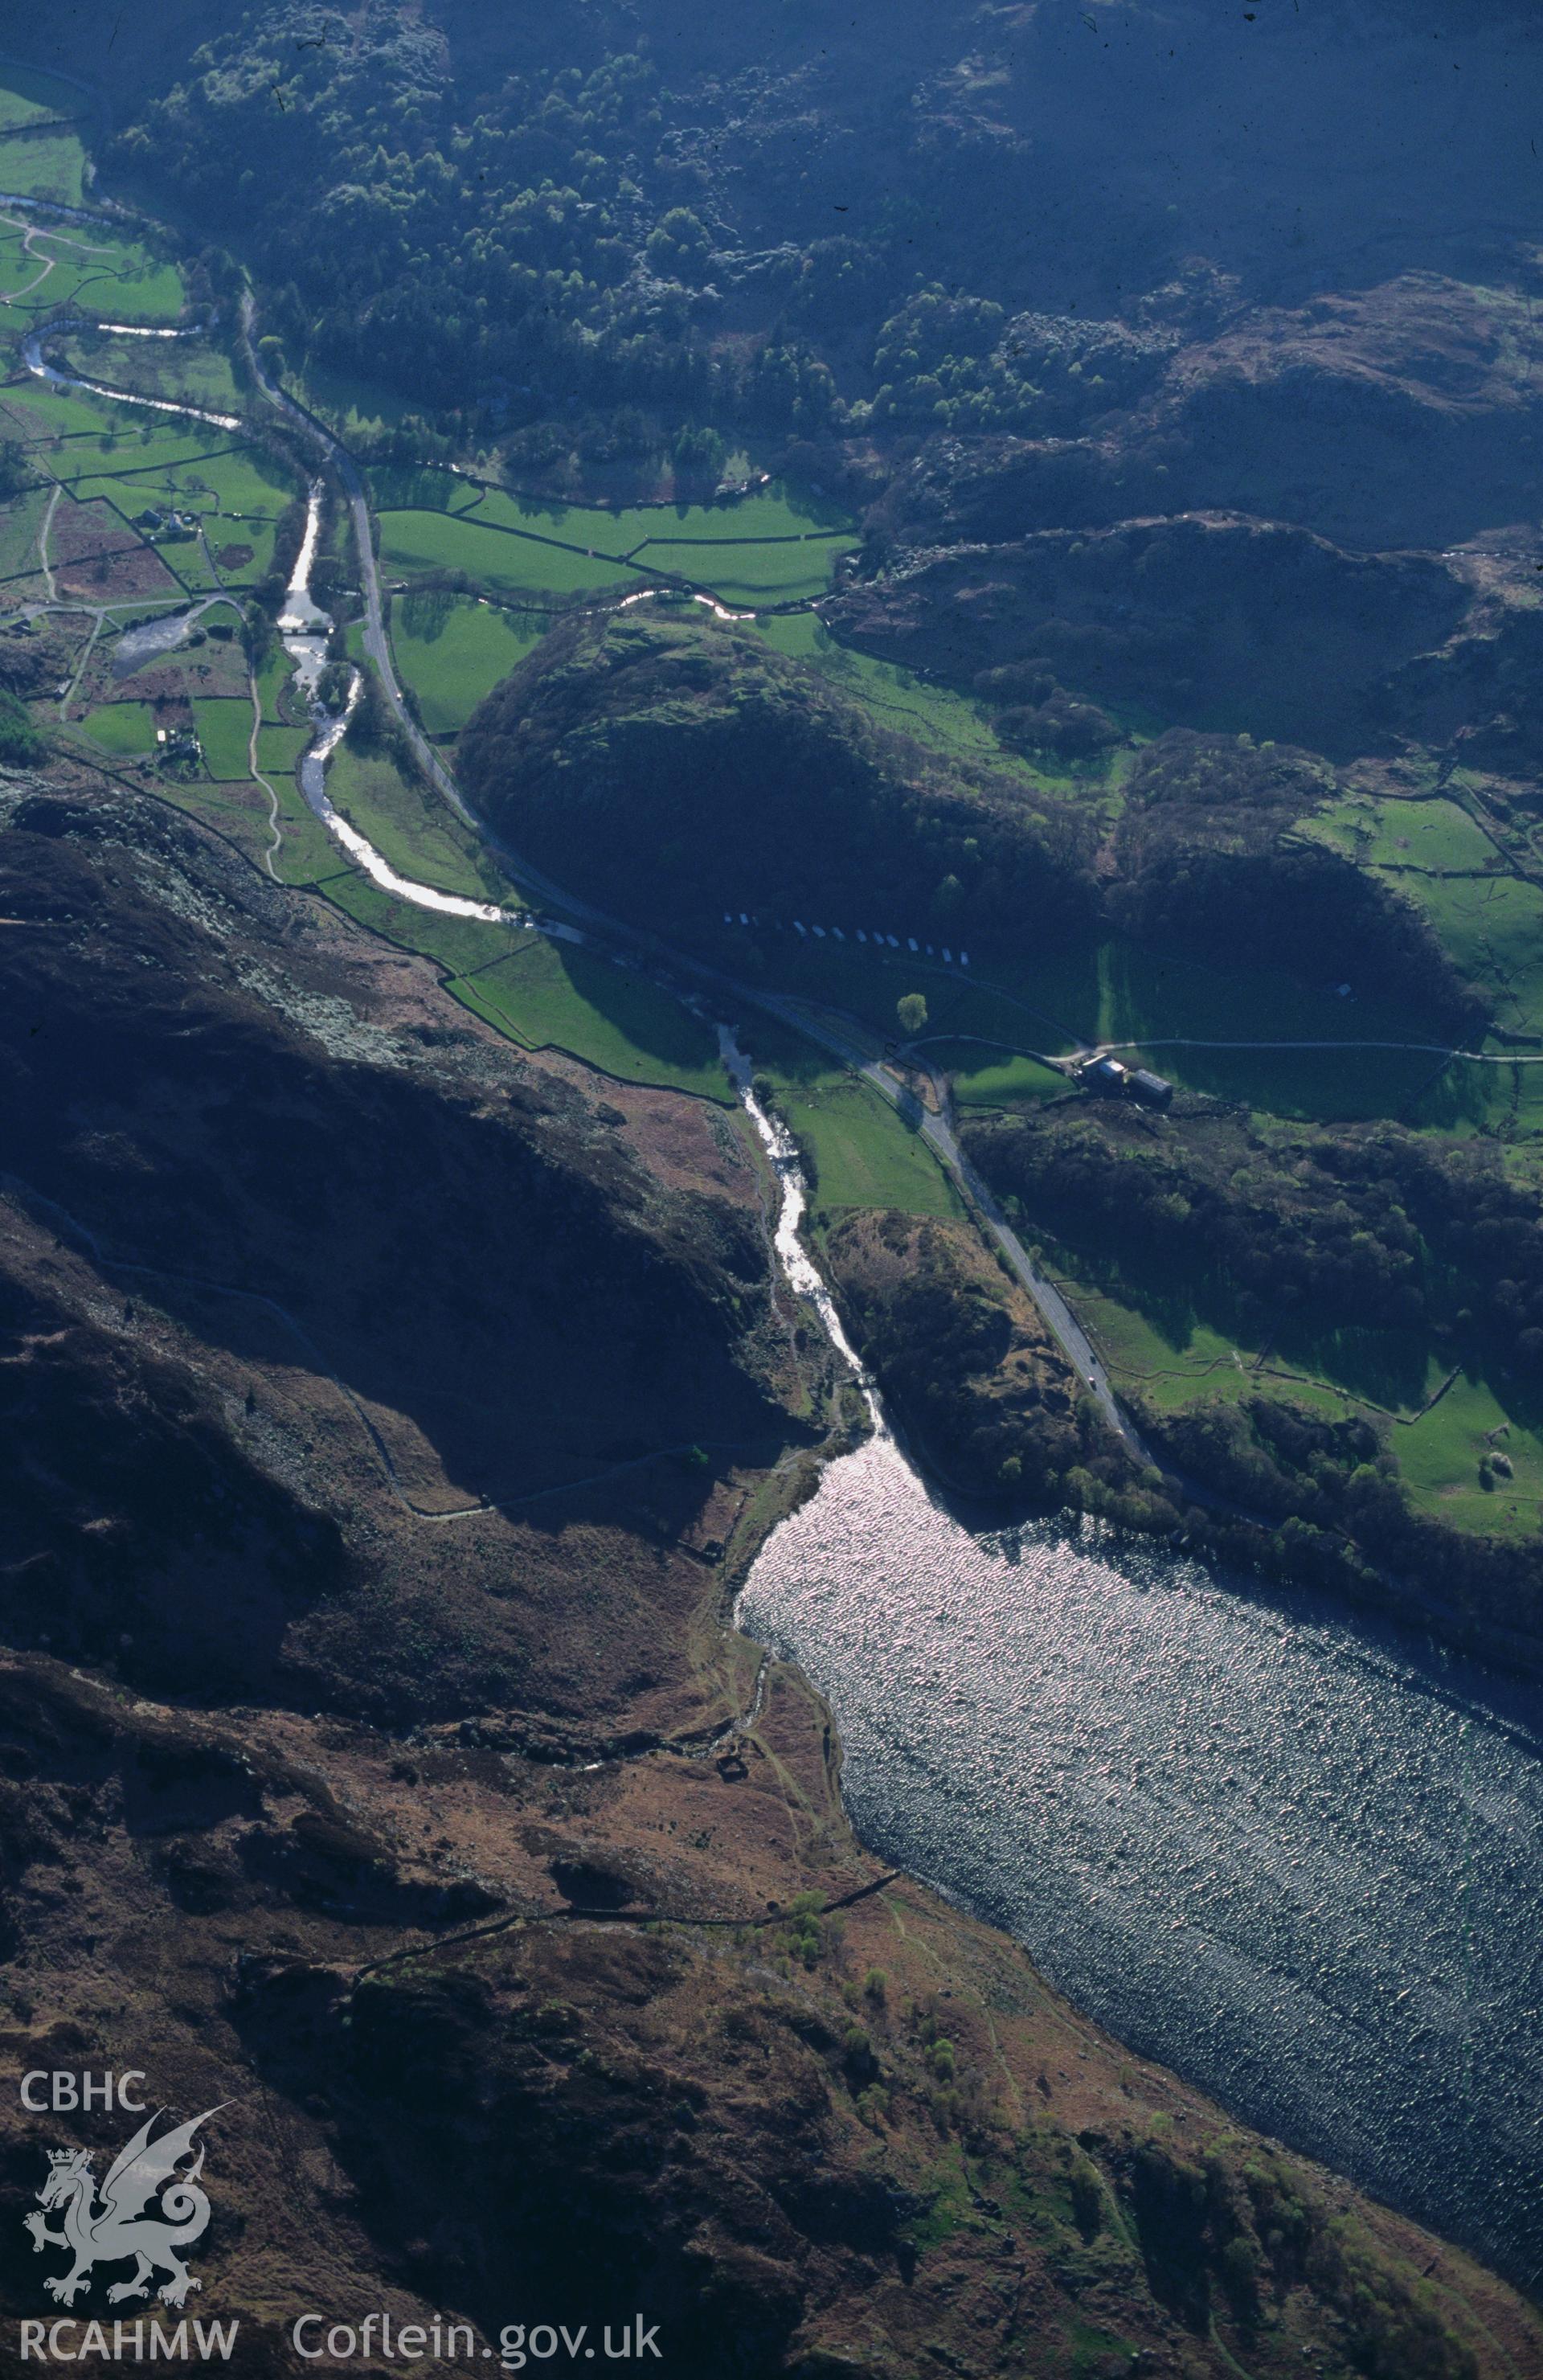 RCAHMW colour slide oblique aerial photograph of Dinas Emrys Hillfort, Beddgelert, taken by C.R.Musson on the 06/05/1996